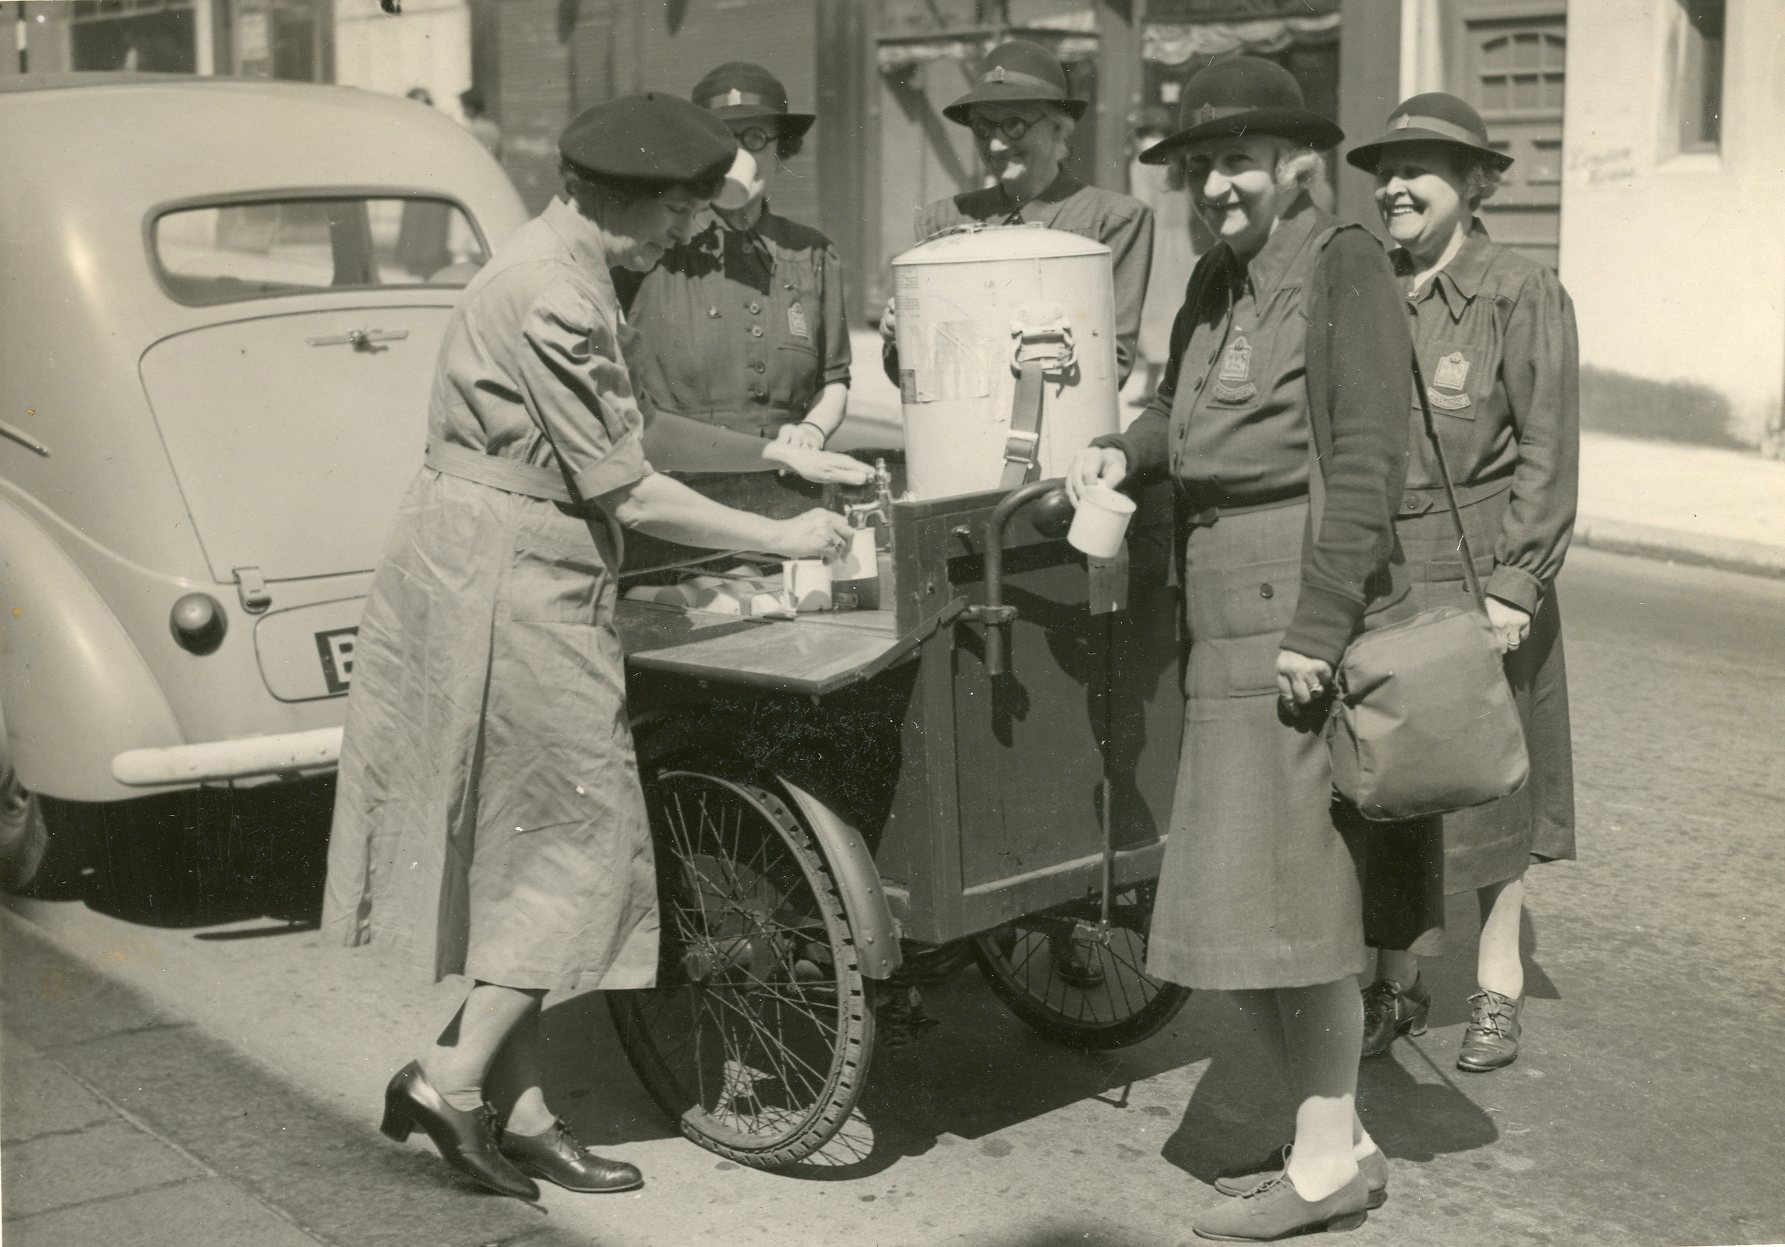 Lady Worsley trying out a WVS snack bar trailer, 19 June 1943